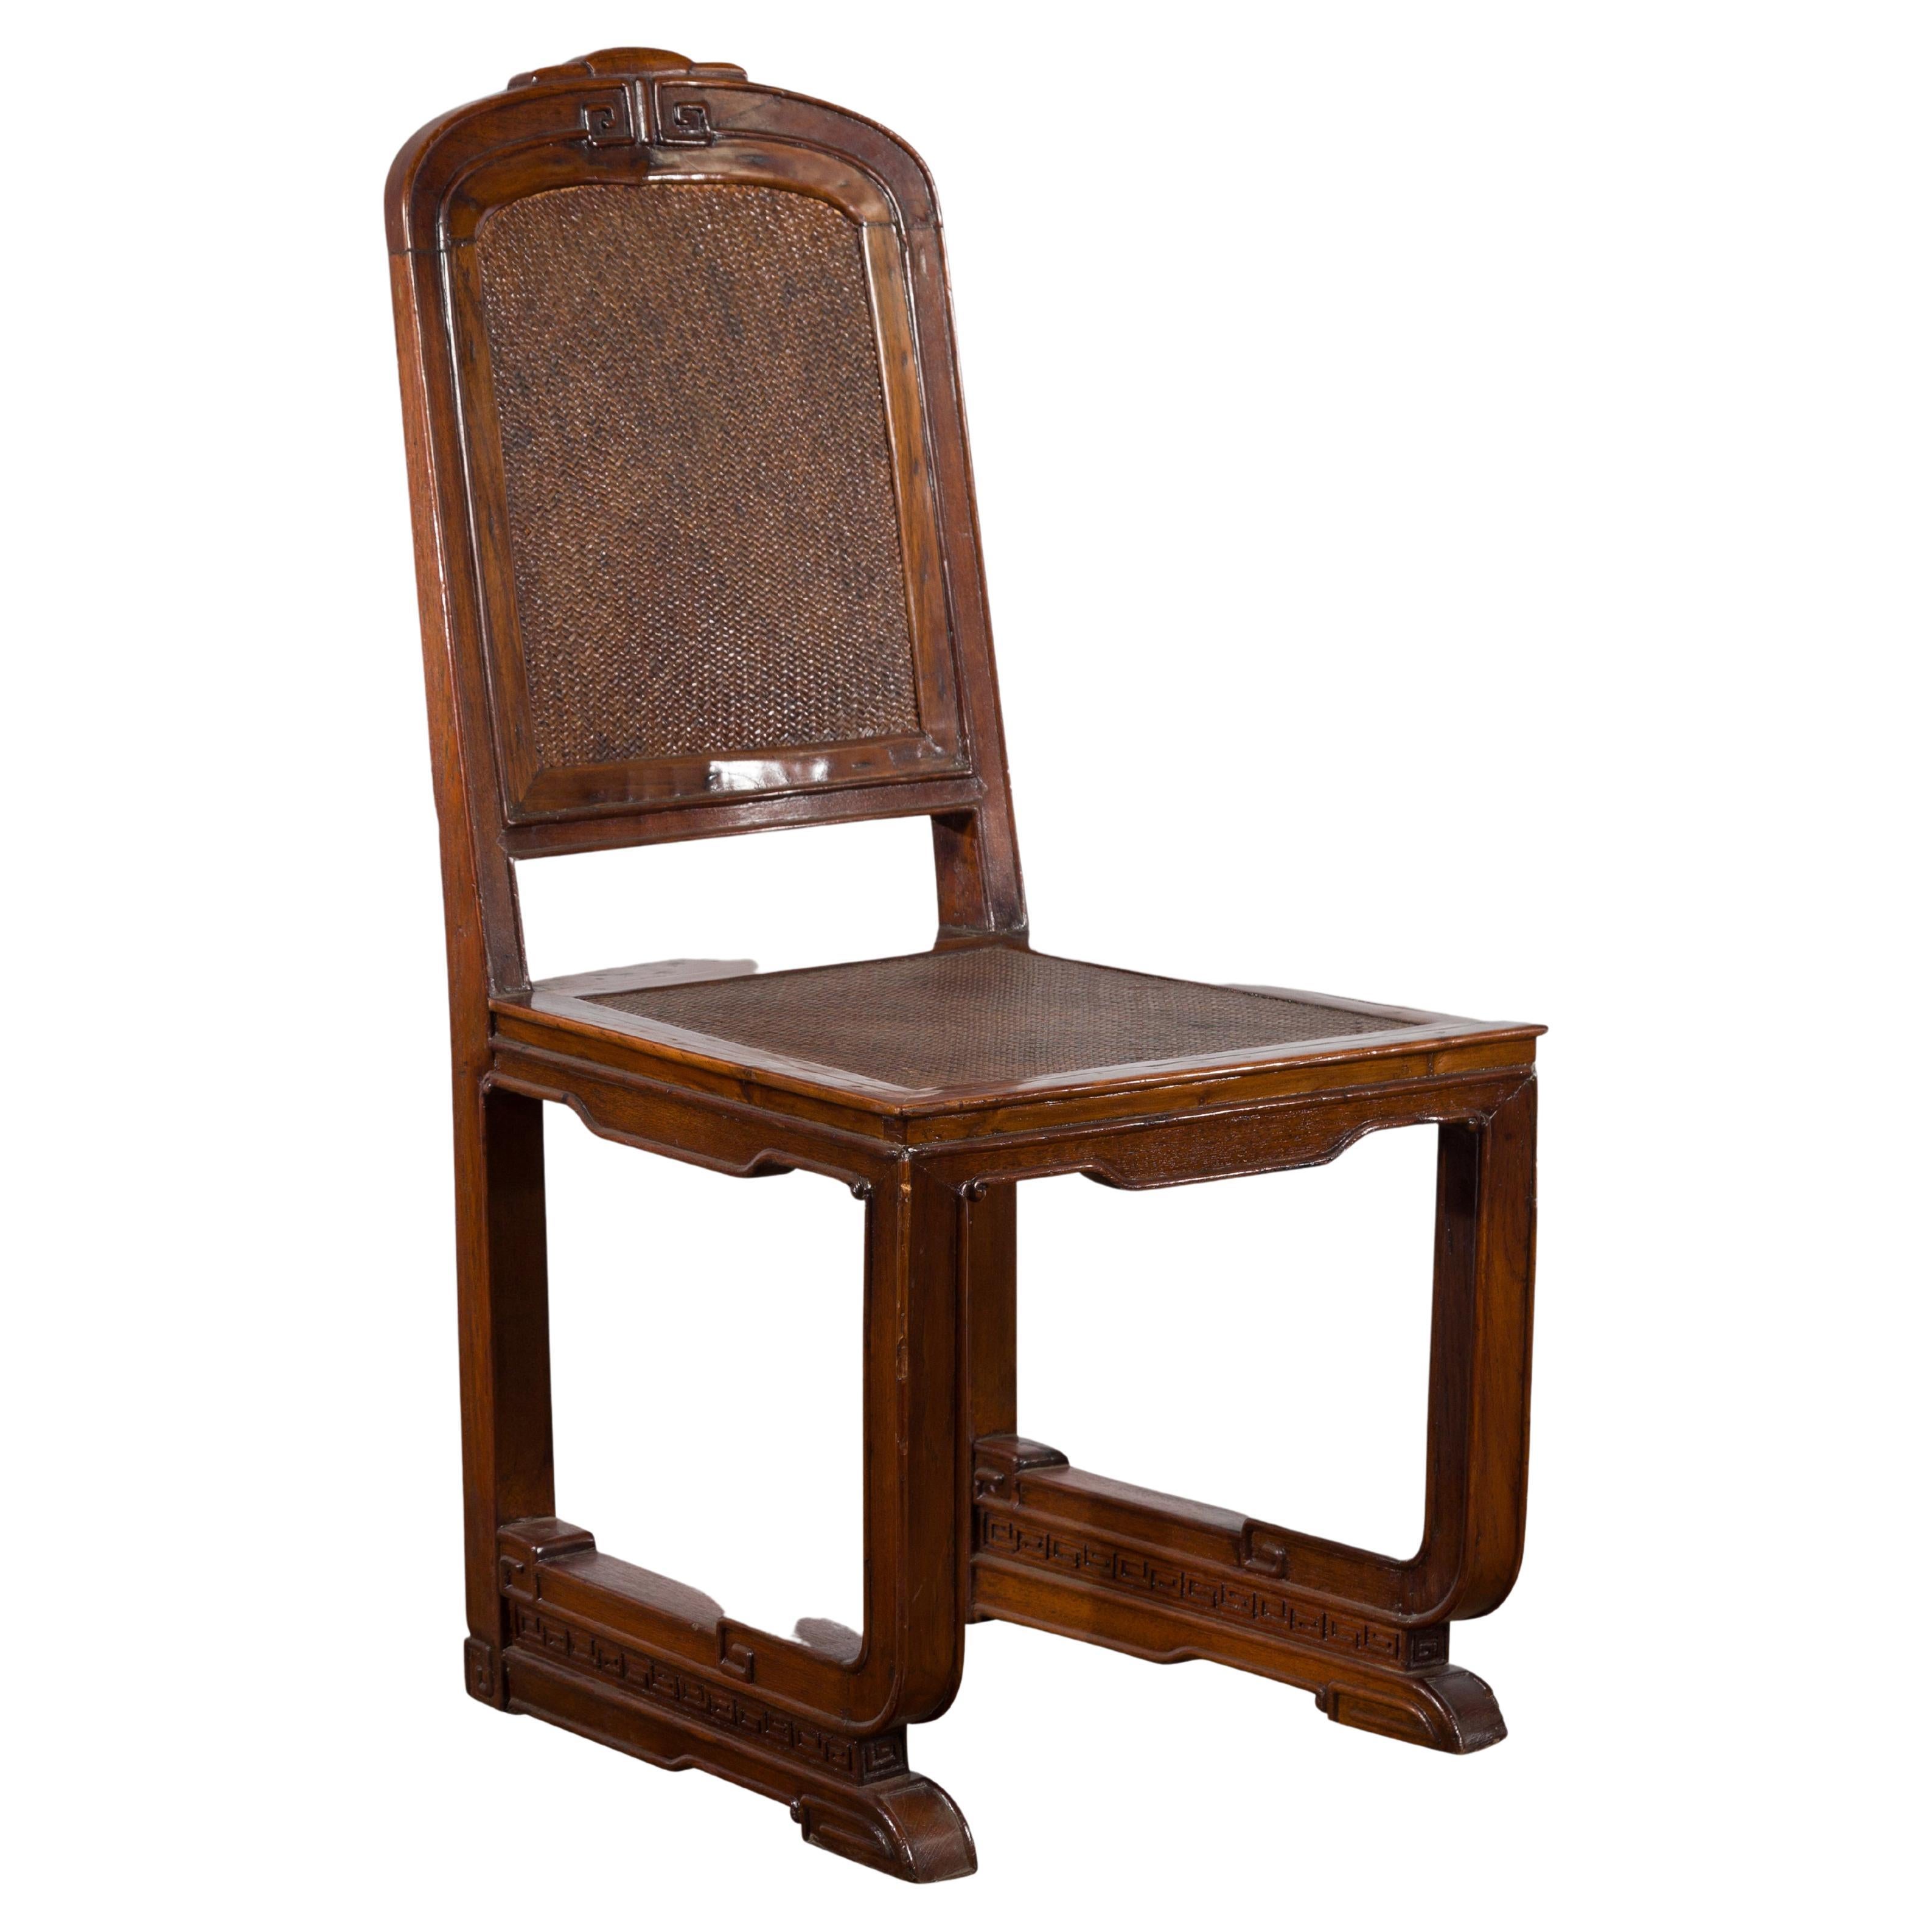 A Chinese Qing Dynasty period dark brown lacquer wooden side chair from the 19th century with rattan seat and back, carved scrolls and meander motifs. Created in China during the Qing Dynasty period in the 19th century, this wooden side chair